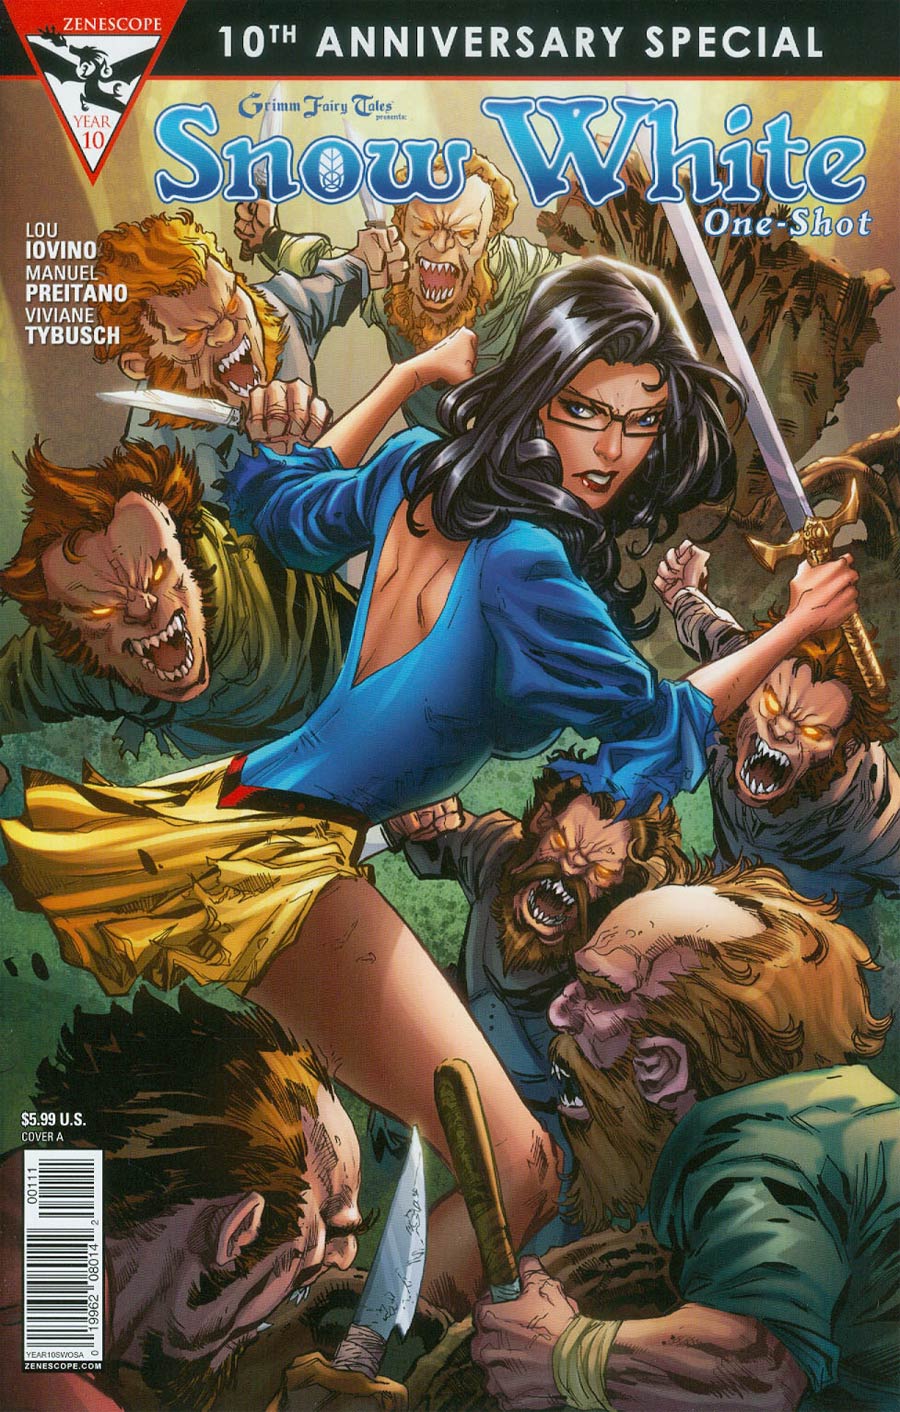 Grimm Fairy Tales Presents 10th Anniversary Special #1 Snow White Cover A Ken Lashley